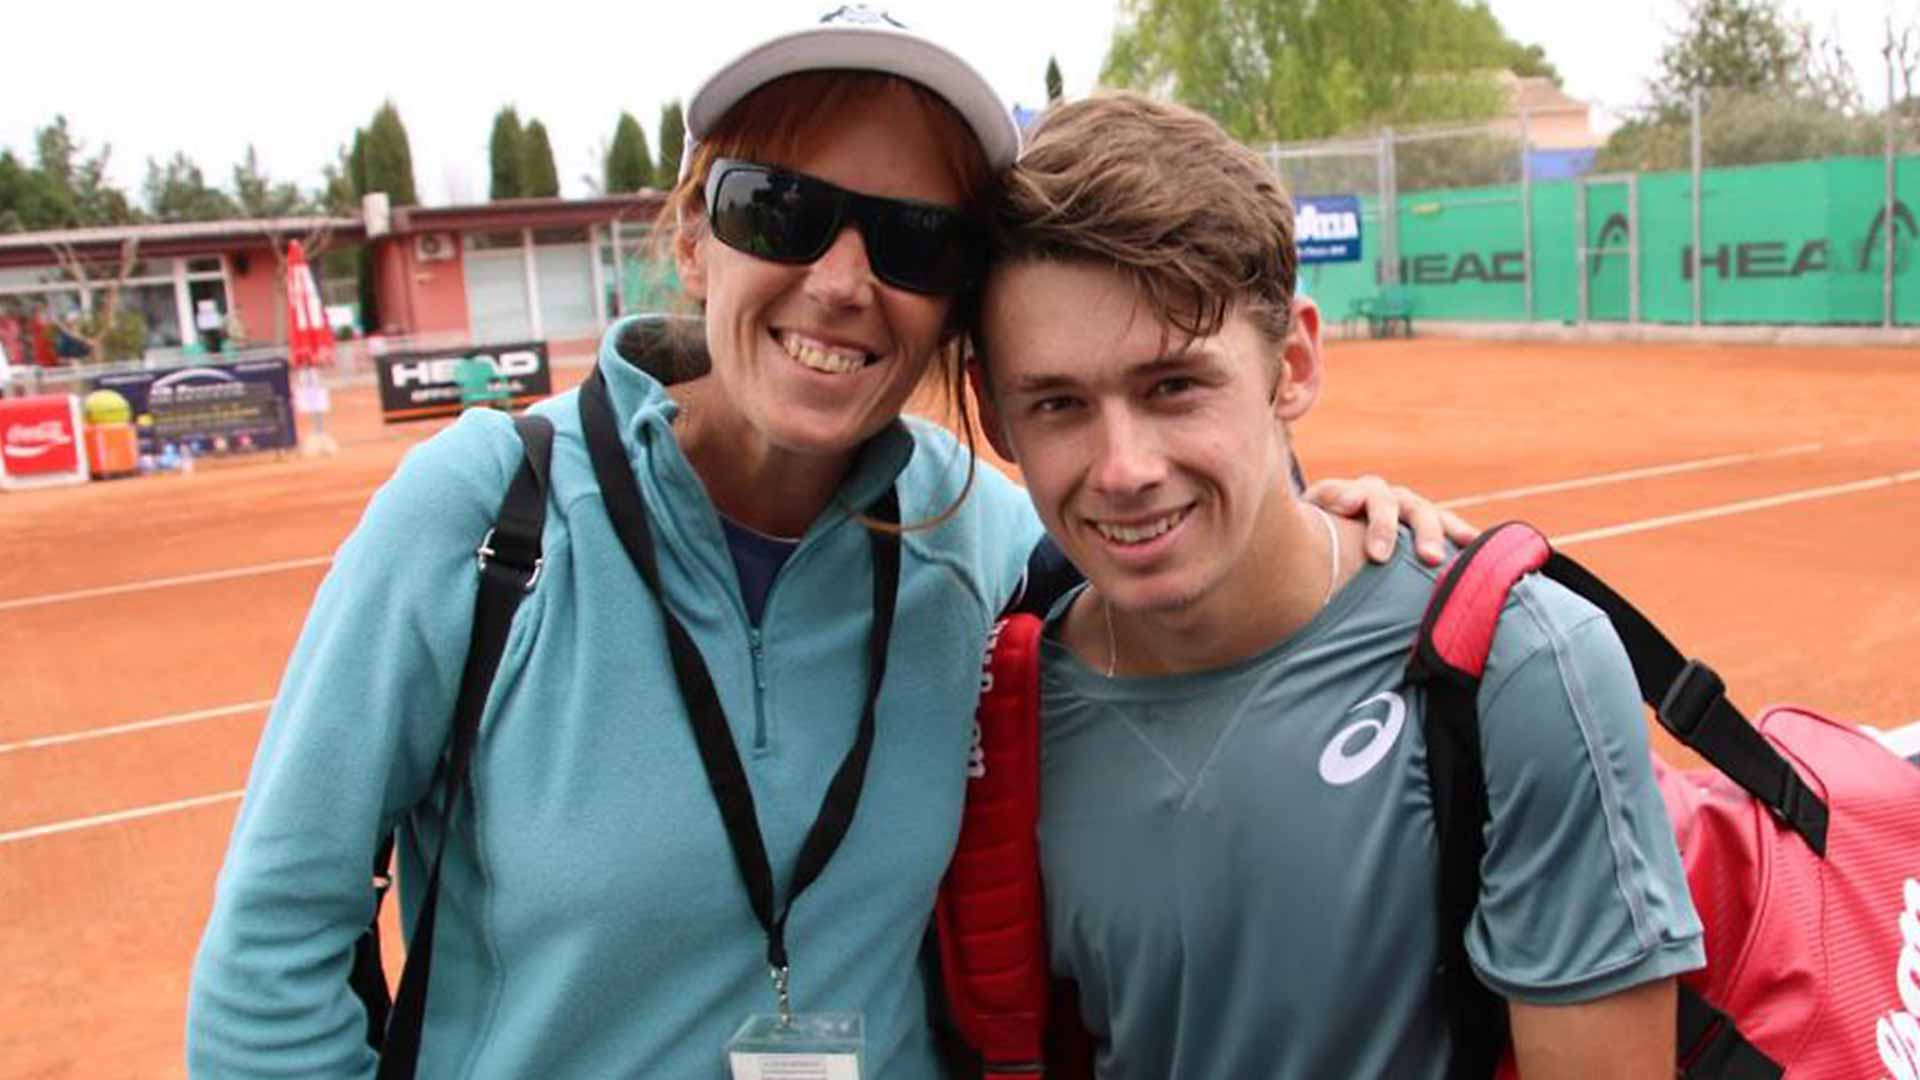 Esther Roman says the success her Alex de Minaur has had on the ATP Tour hasn't changed him as a person.